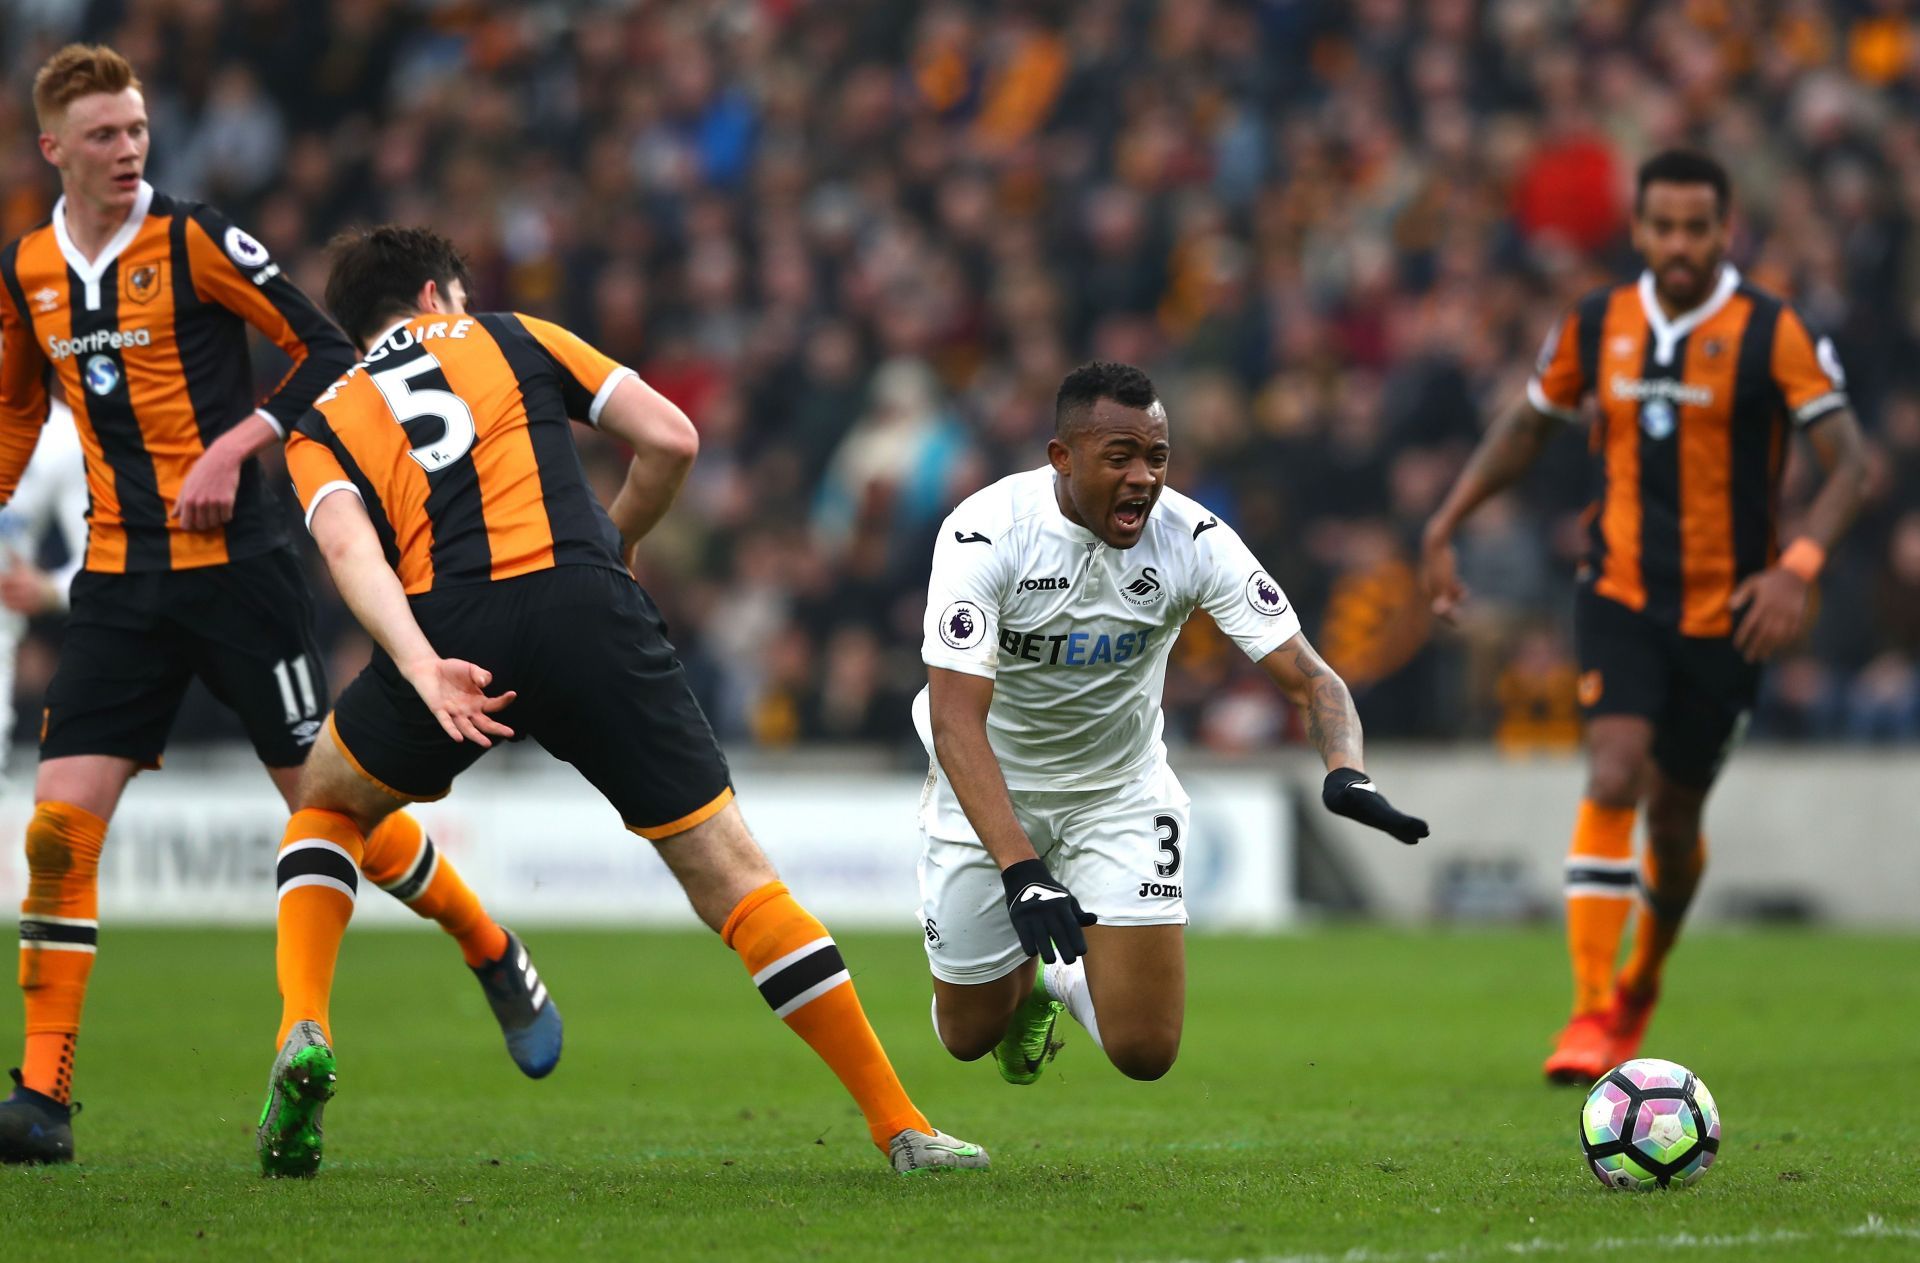 Hull City and Swansea City square off at the MKM Stadium on Saturday